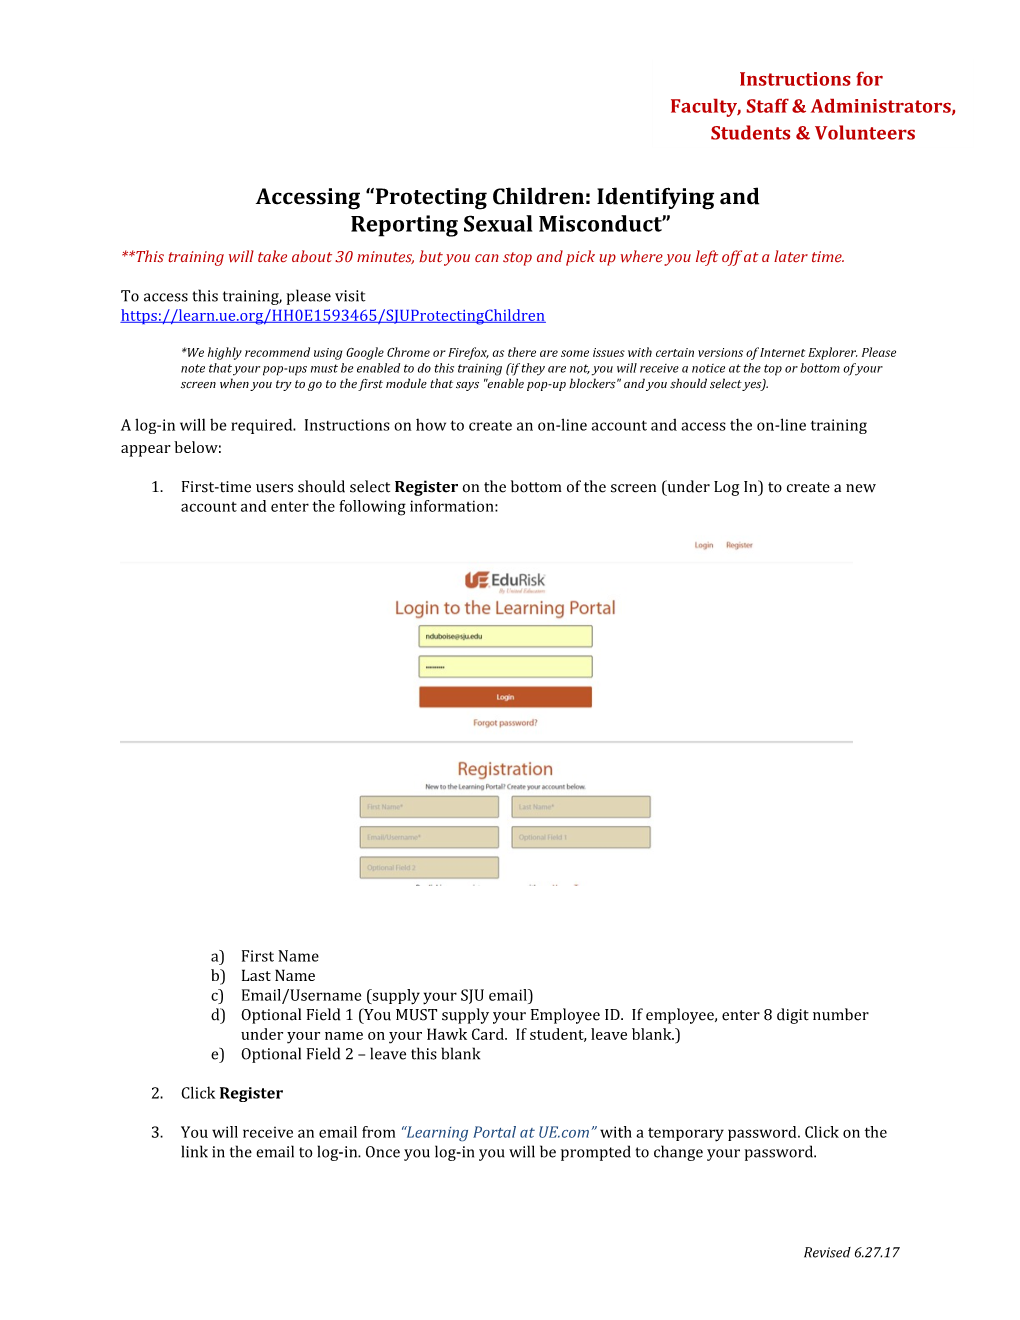 Accessing Protecting Children: Identifying And